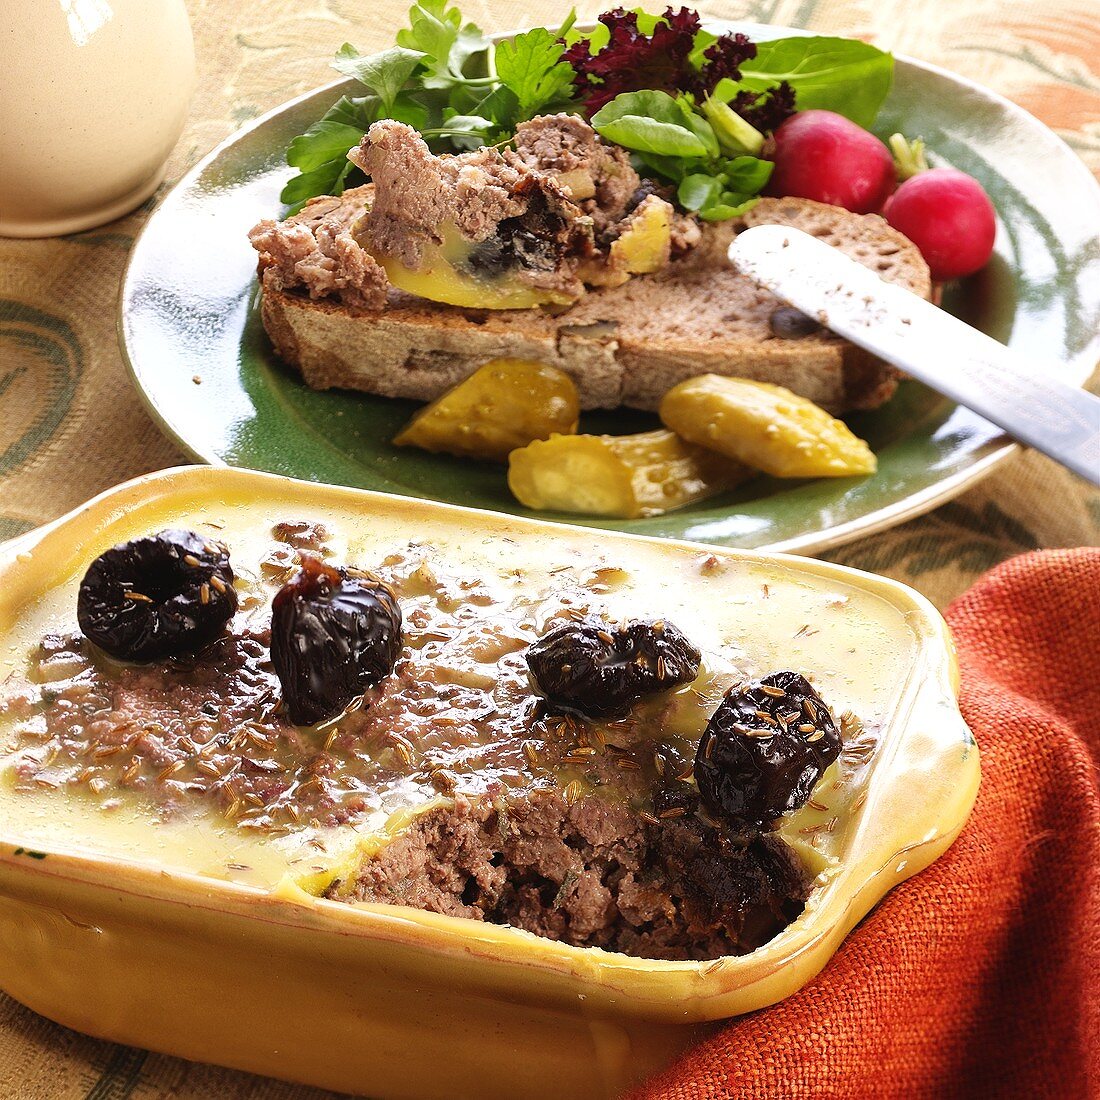 Pig's liver pate with prunes